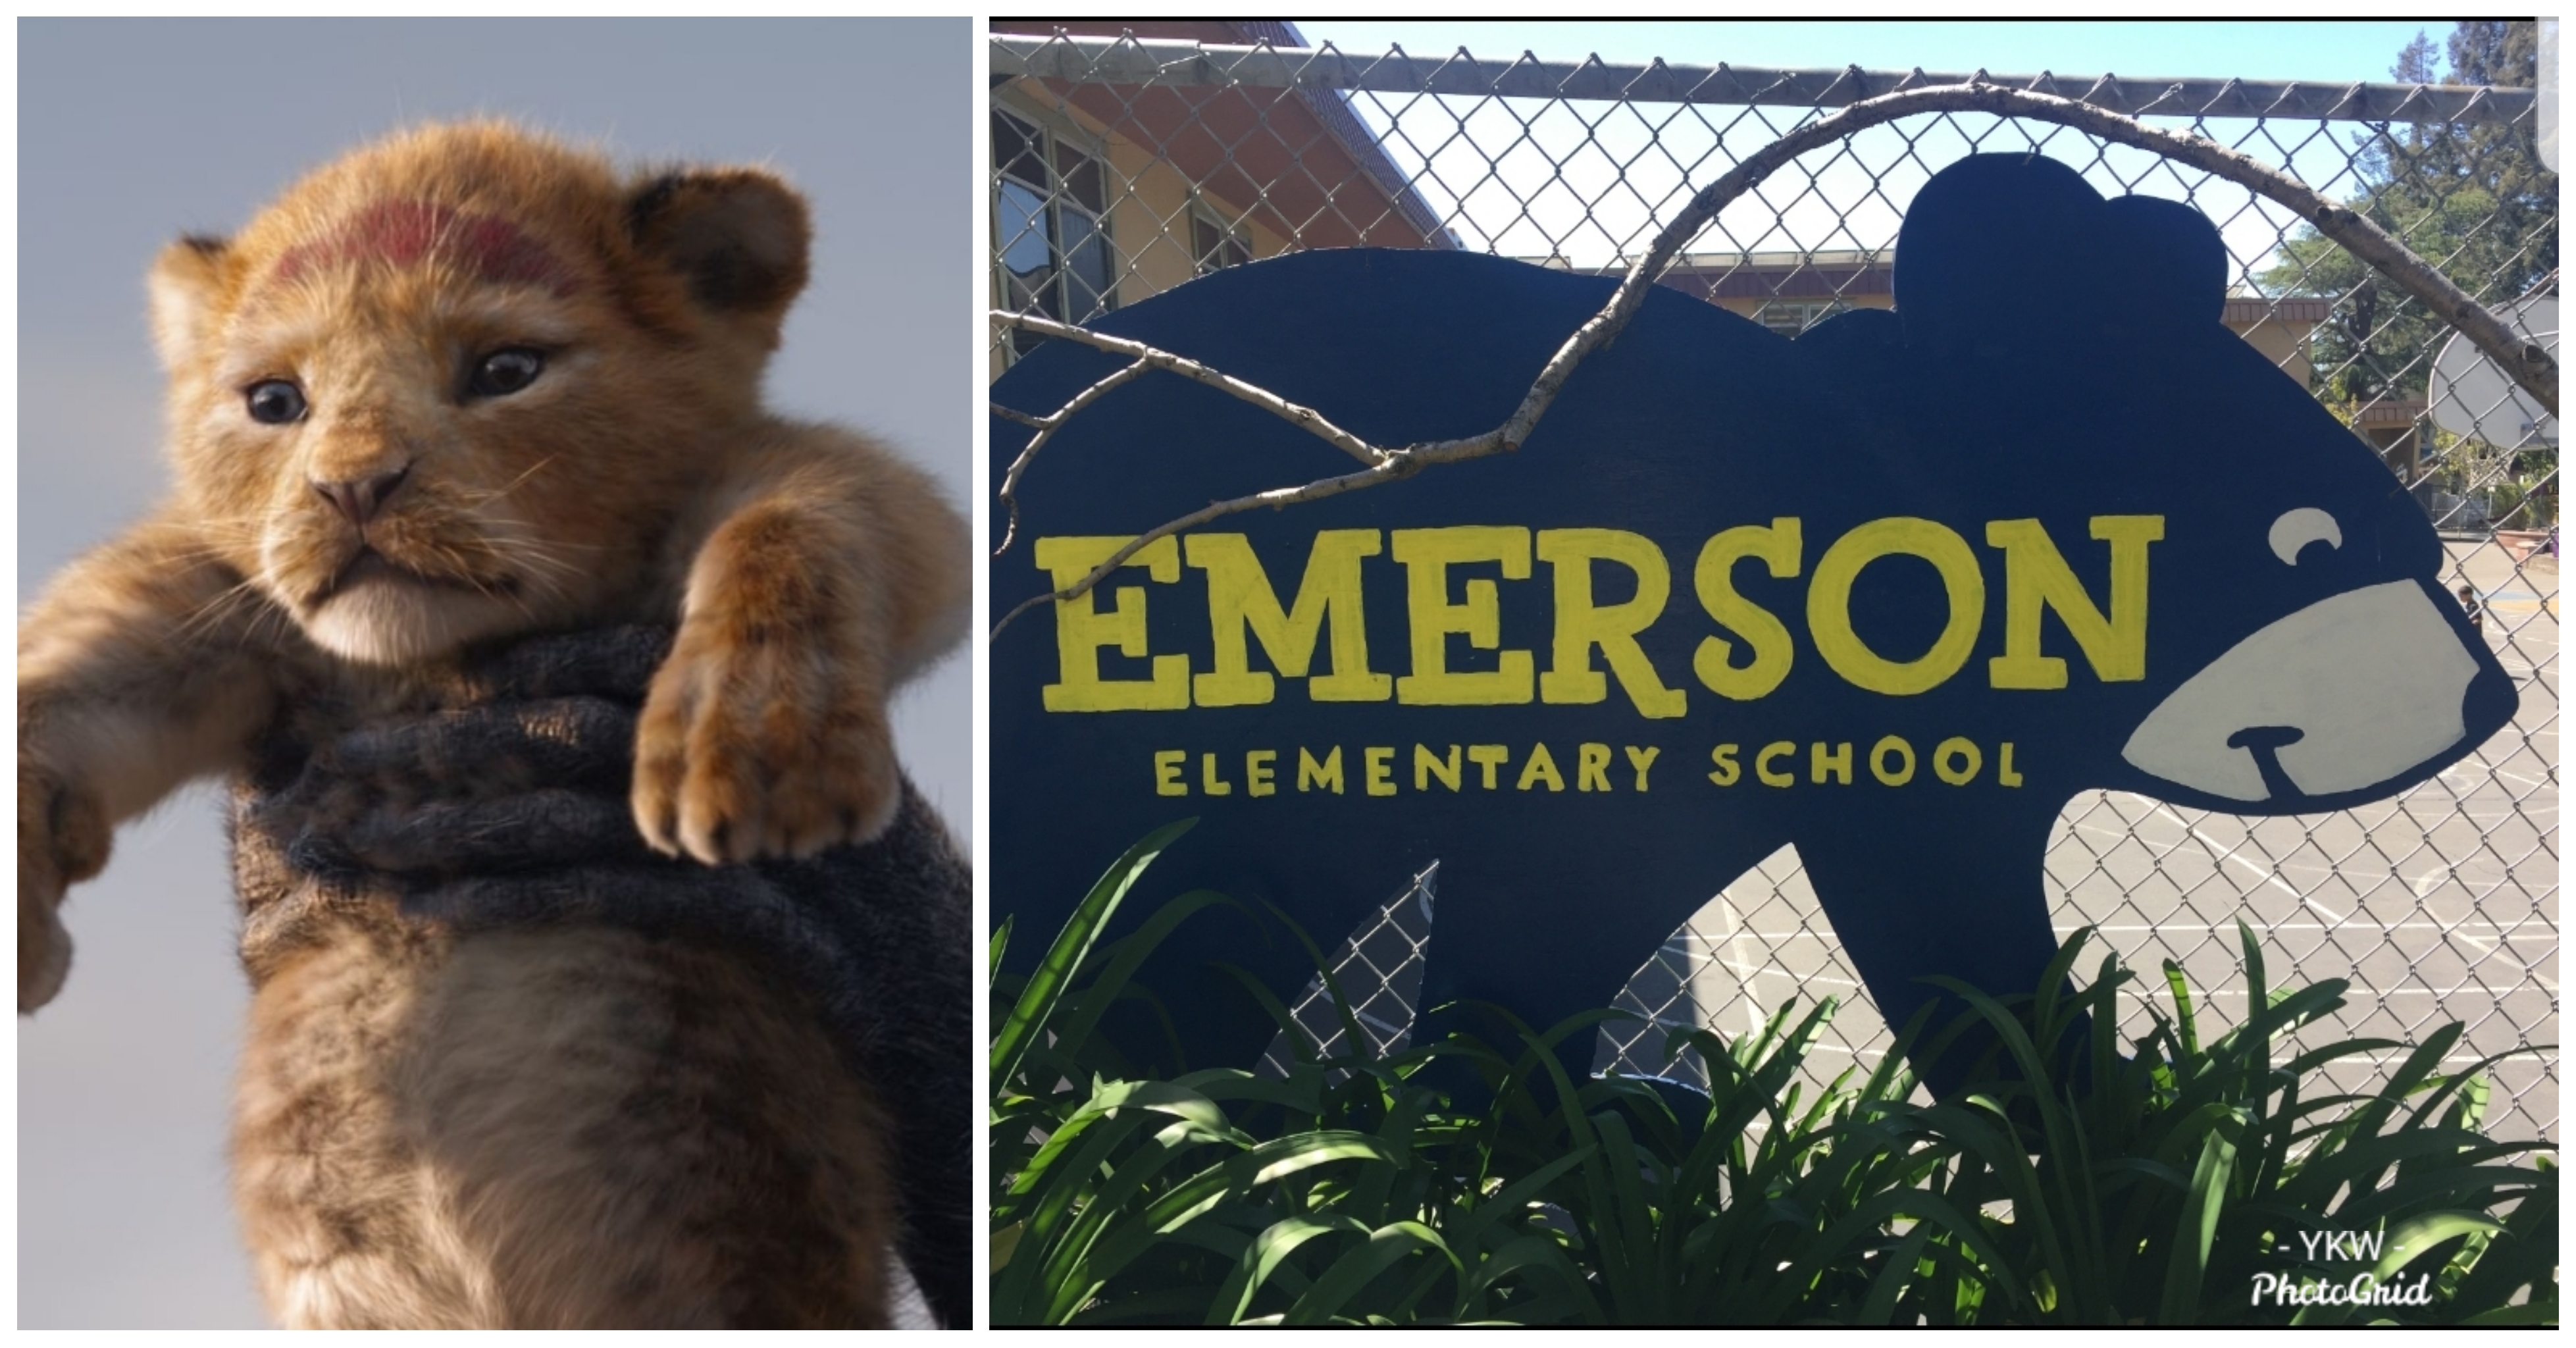 Elementary School Fined $250 After Showing “The Lion King” At Fundraising Event